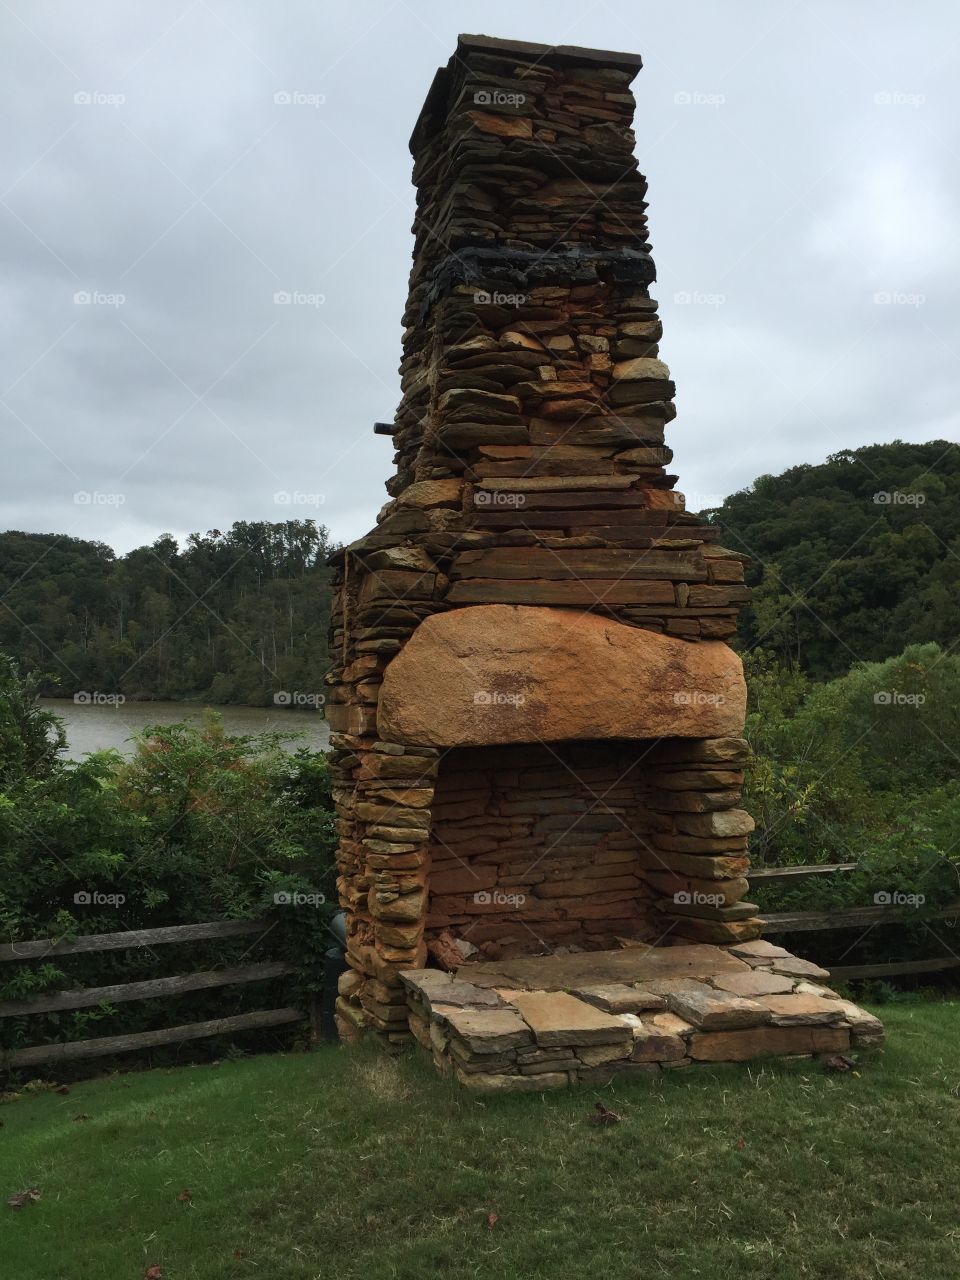 Old chimney by a river